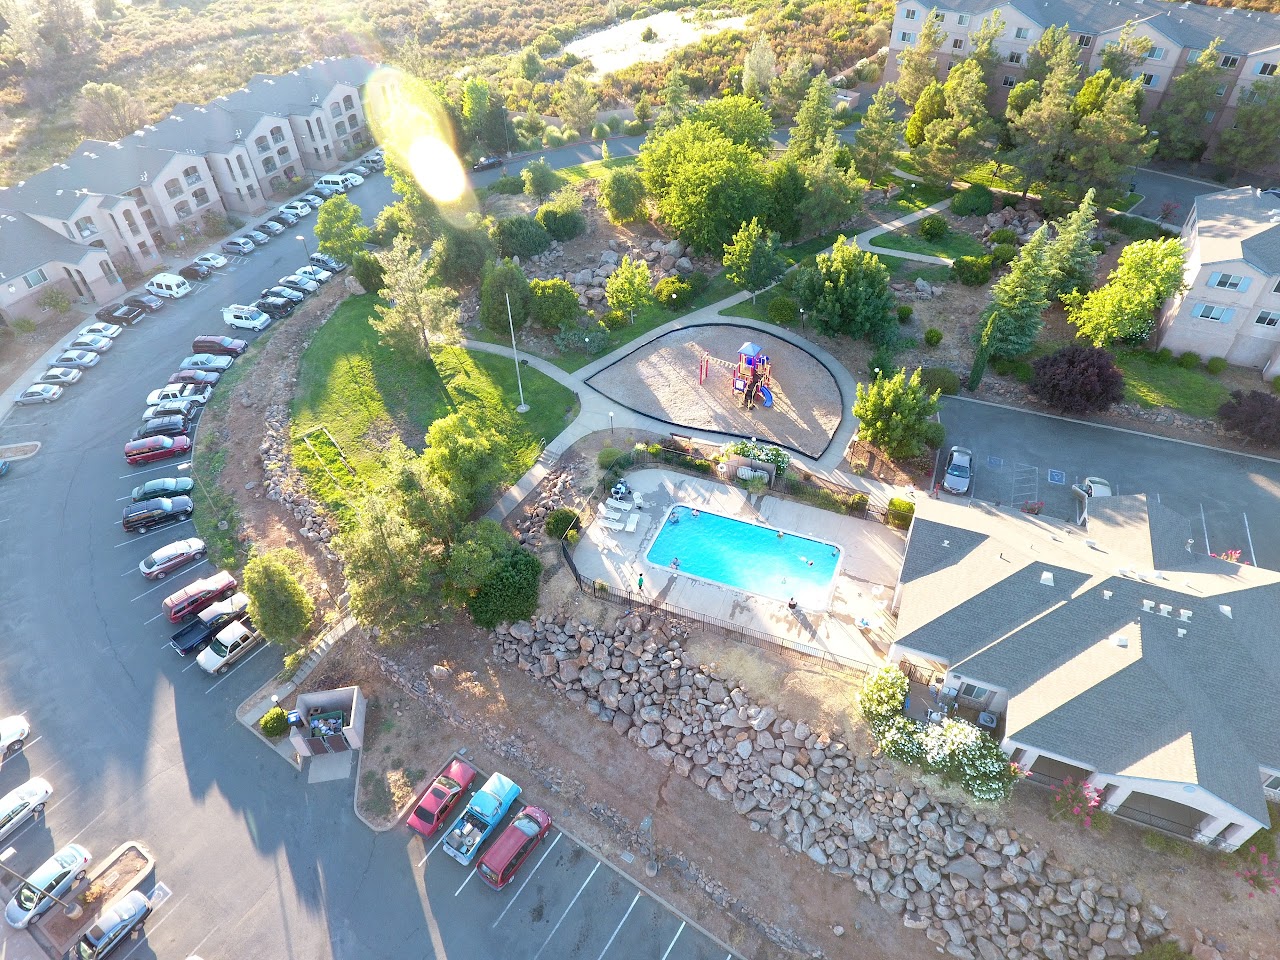 Photo of CACHE CREEK APTS HOMES. Affordable housing located at 16080 DAM RD CLEARLAKE, CA 95422